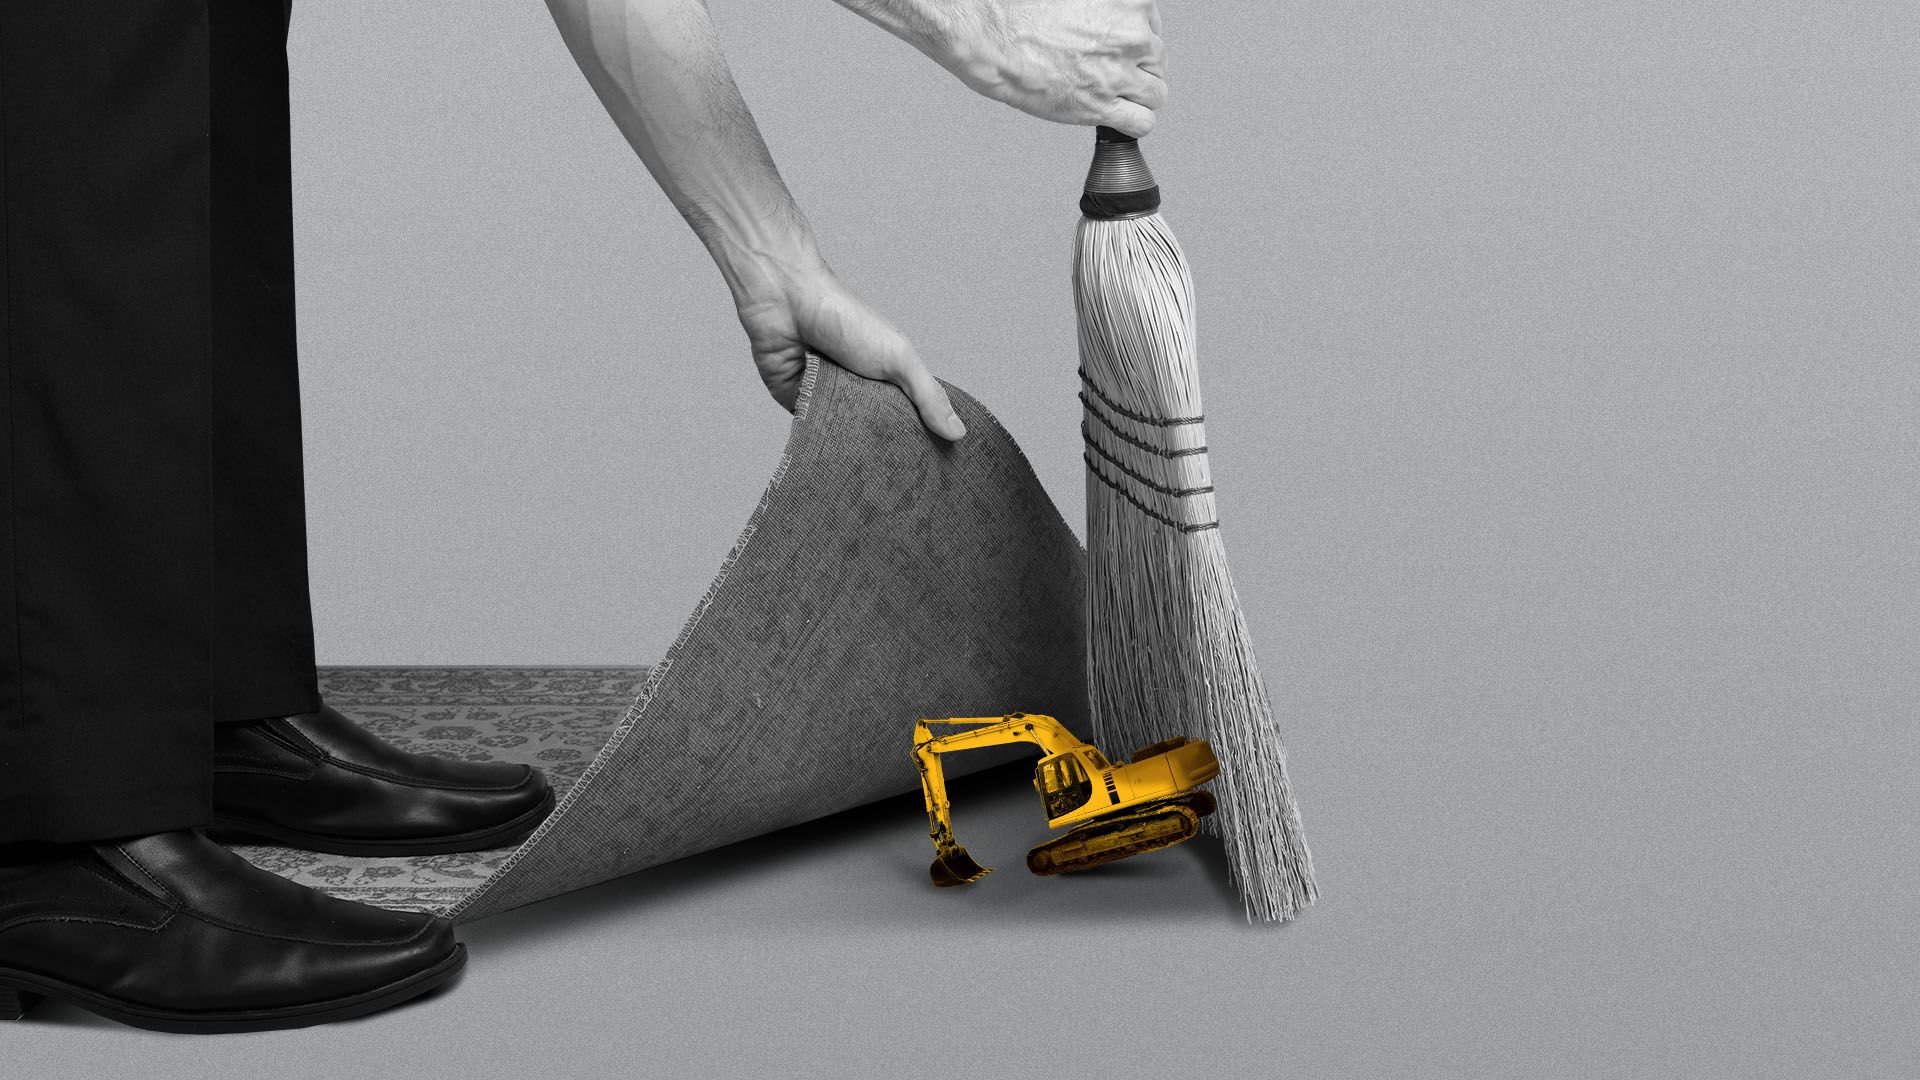 Illustration of a piece of construction equipment being swept under a rug